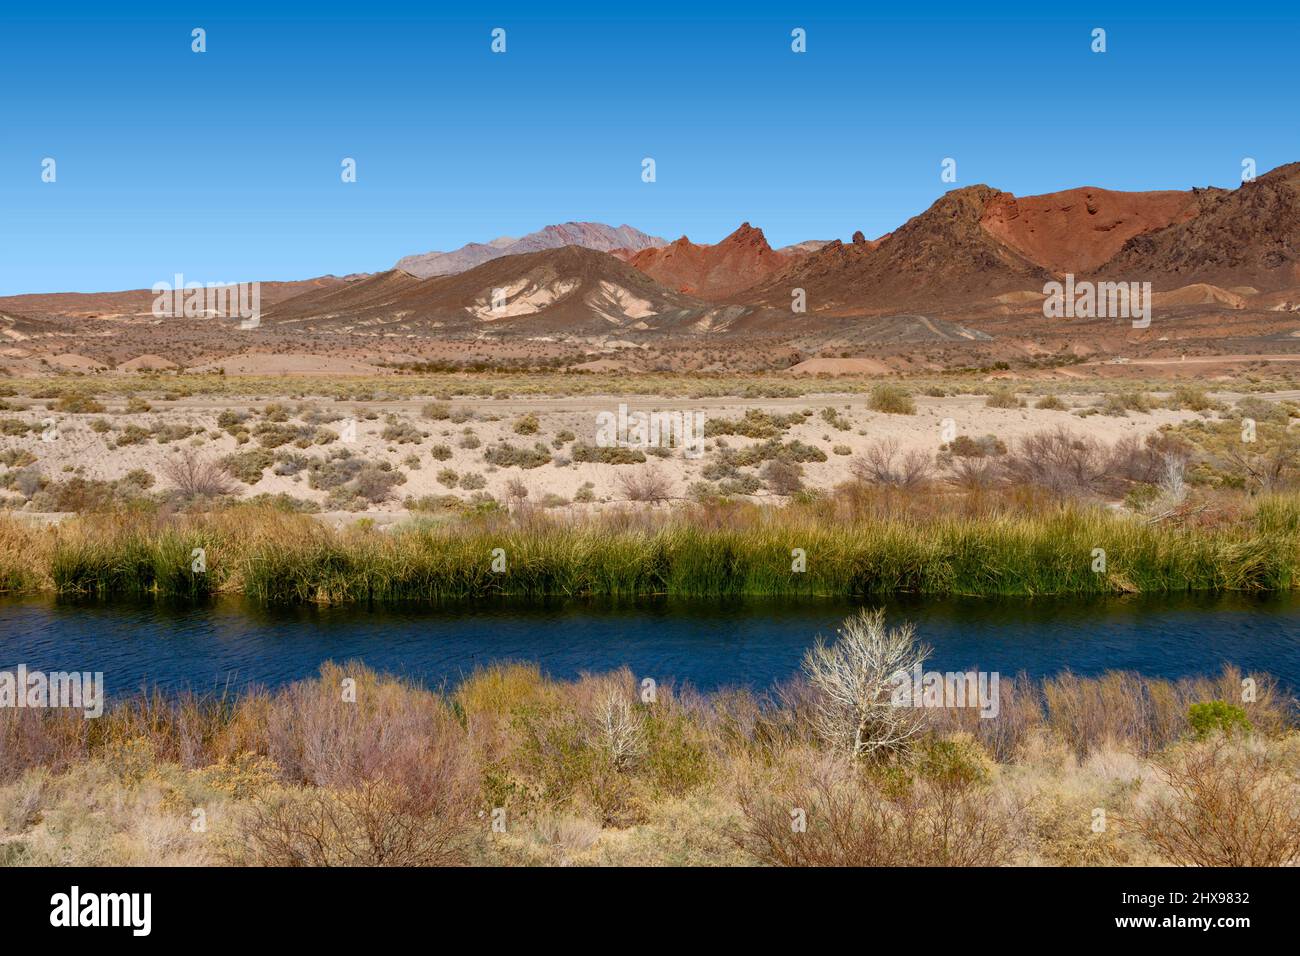 Landscape view of the Las Vegas Wash and mountains Stock Photo